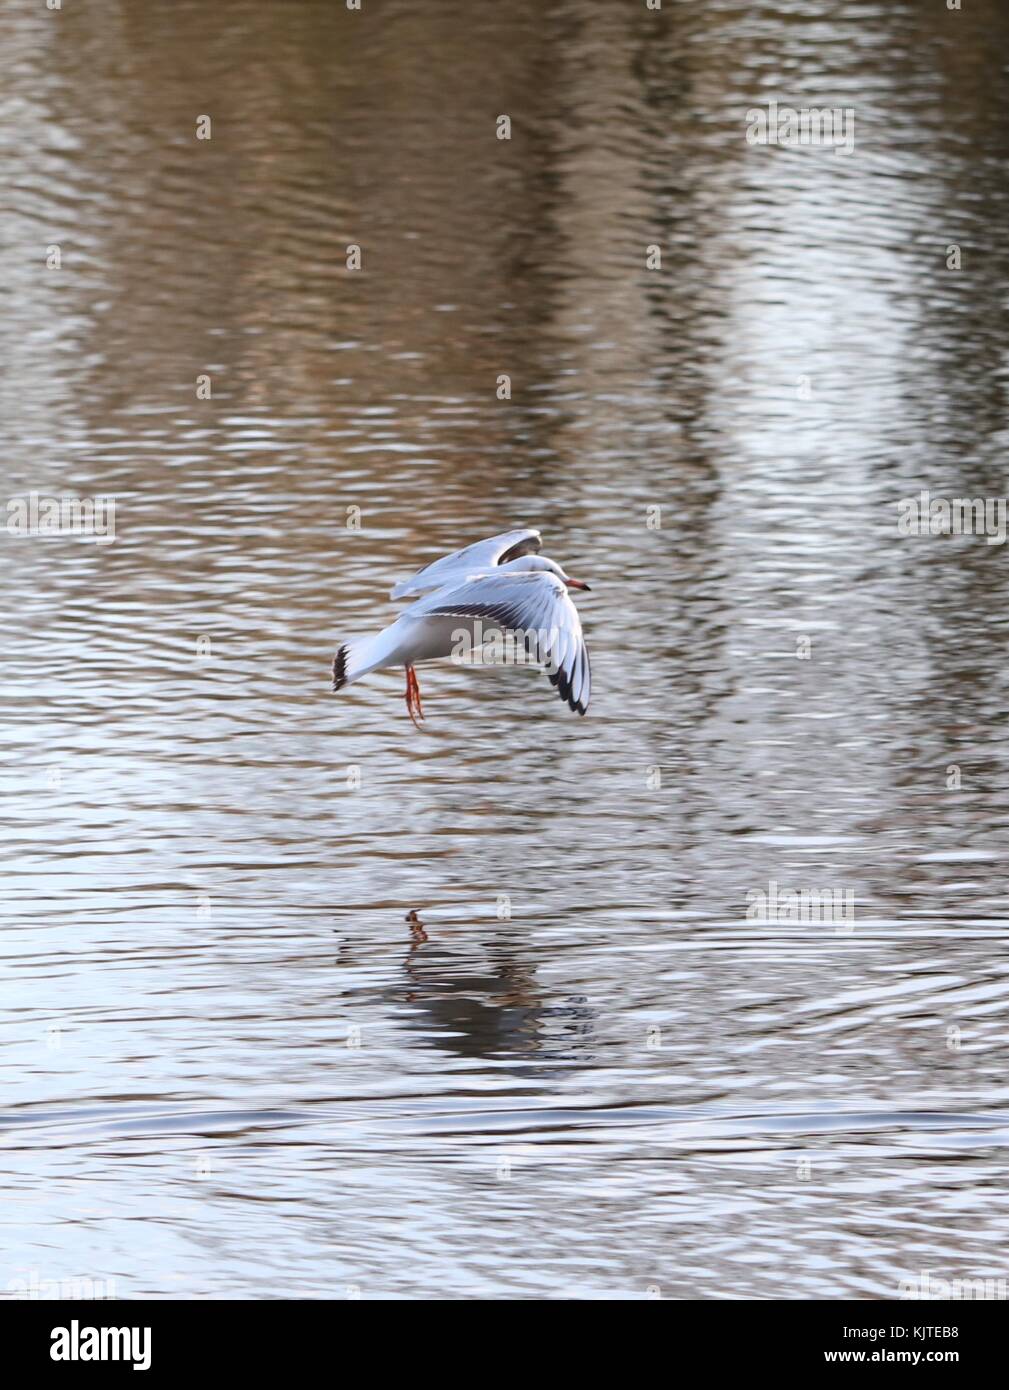 Single bird swooping down over a lake water reflecting Stock Photo